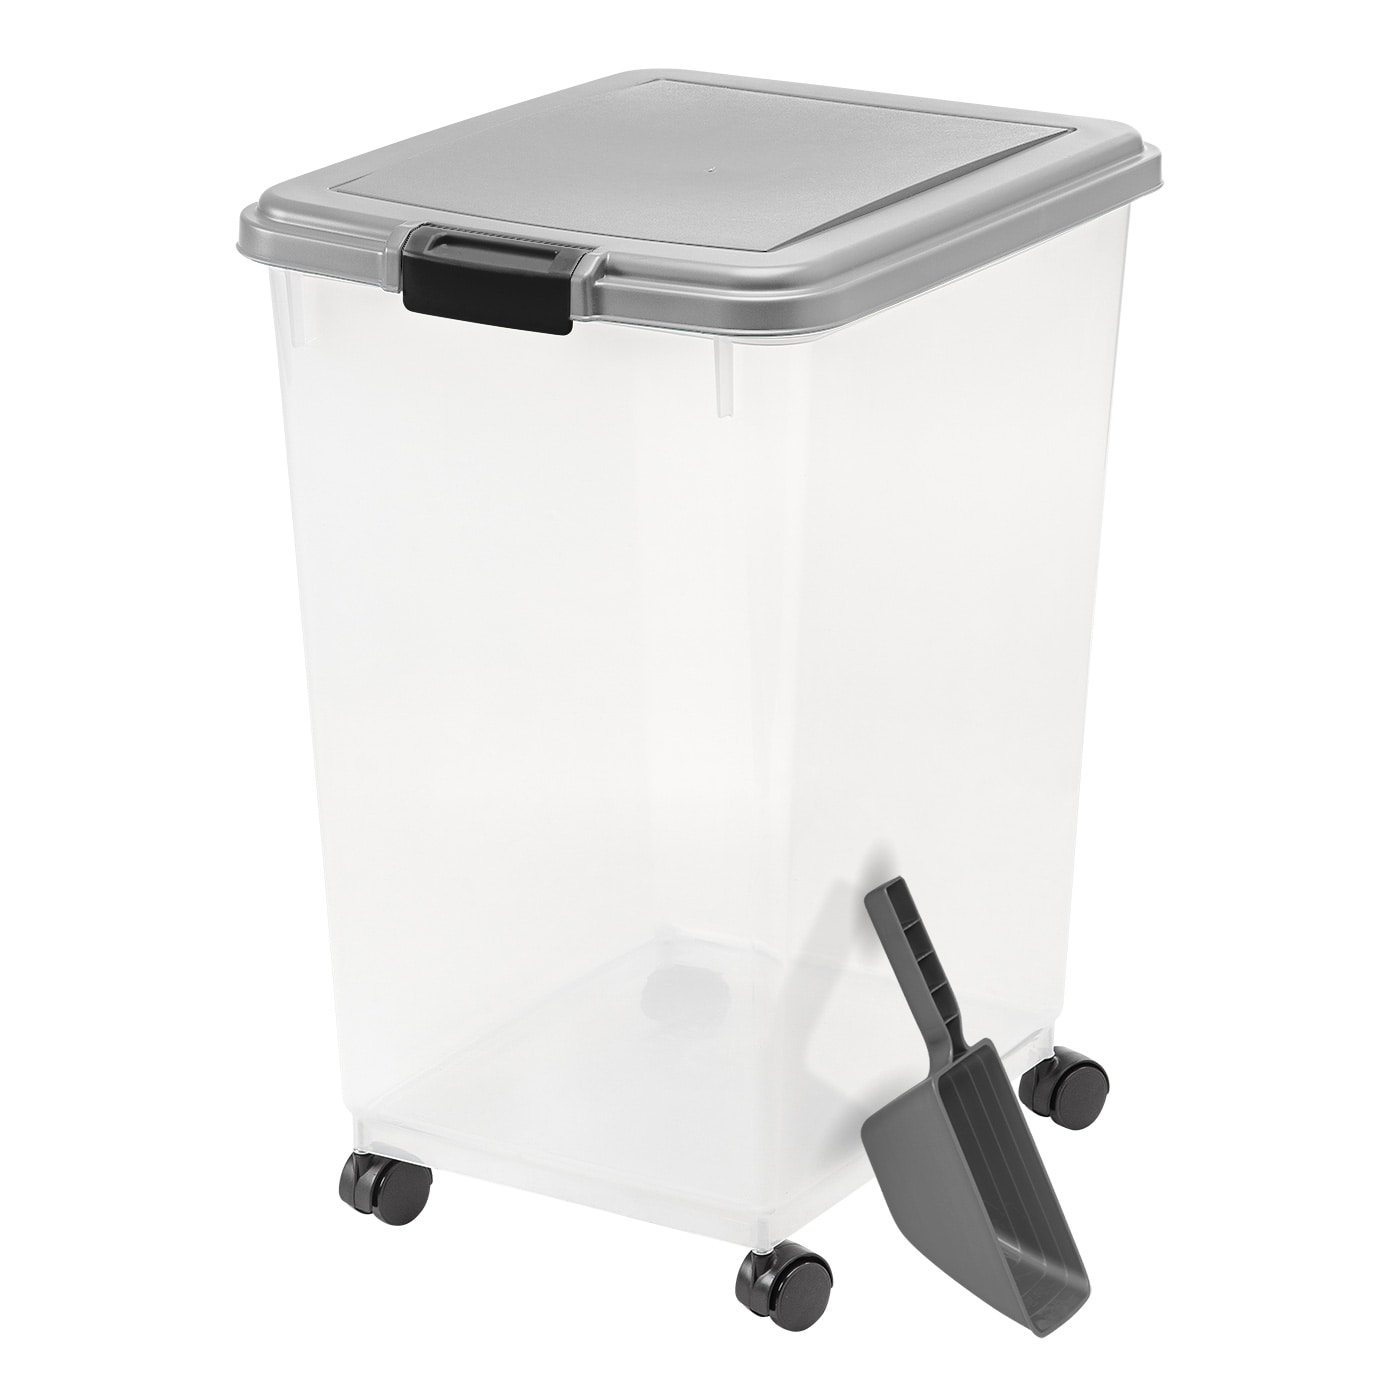 IRIS X-large 17.25-Gallons (69-Quart) Chrome Rolling Tote with 